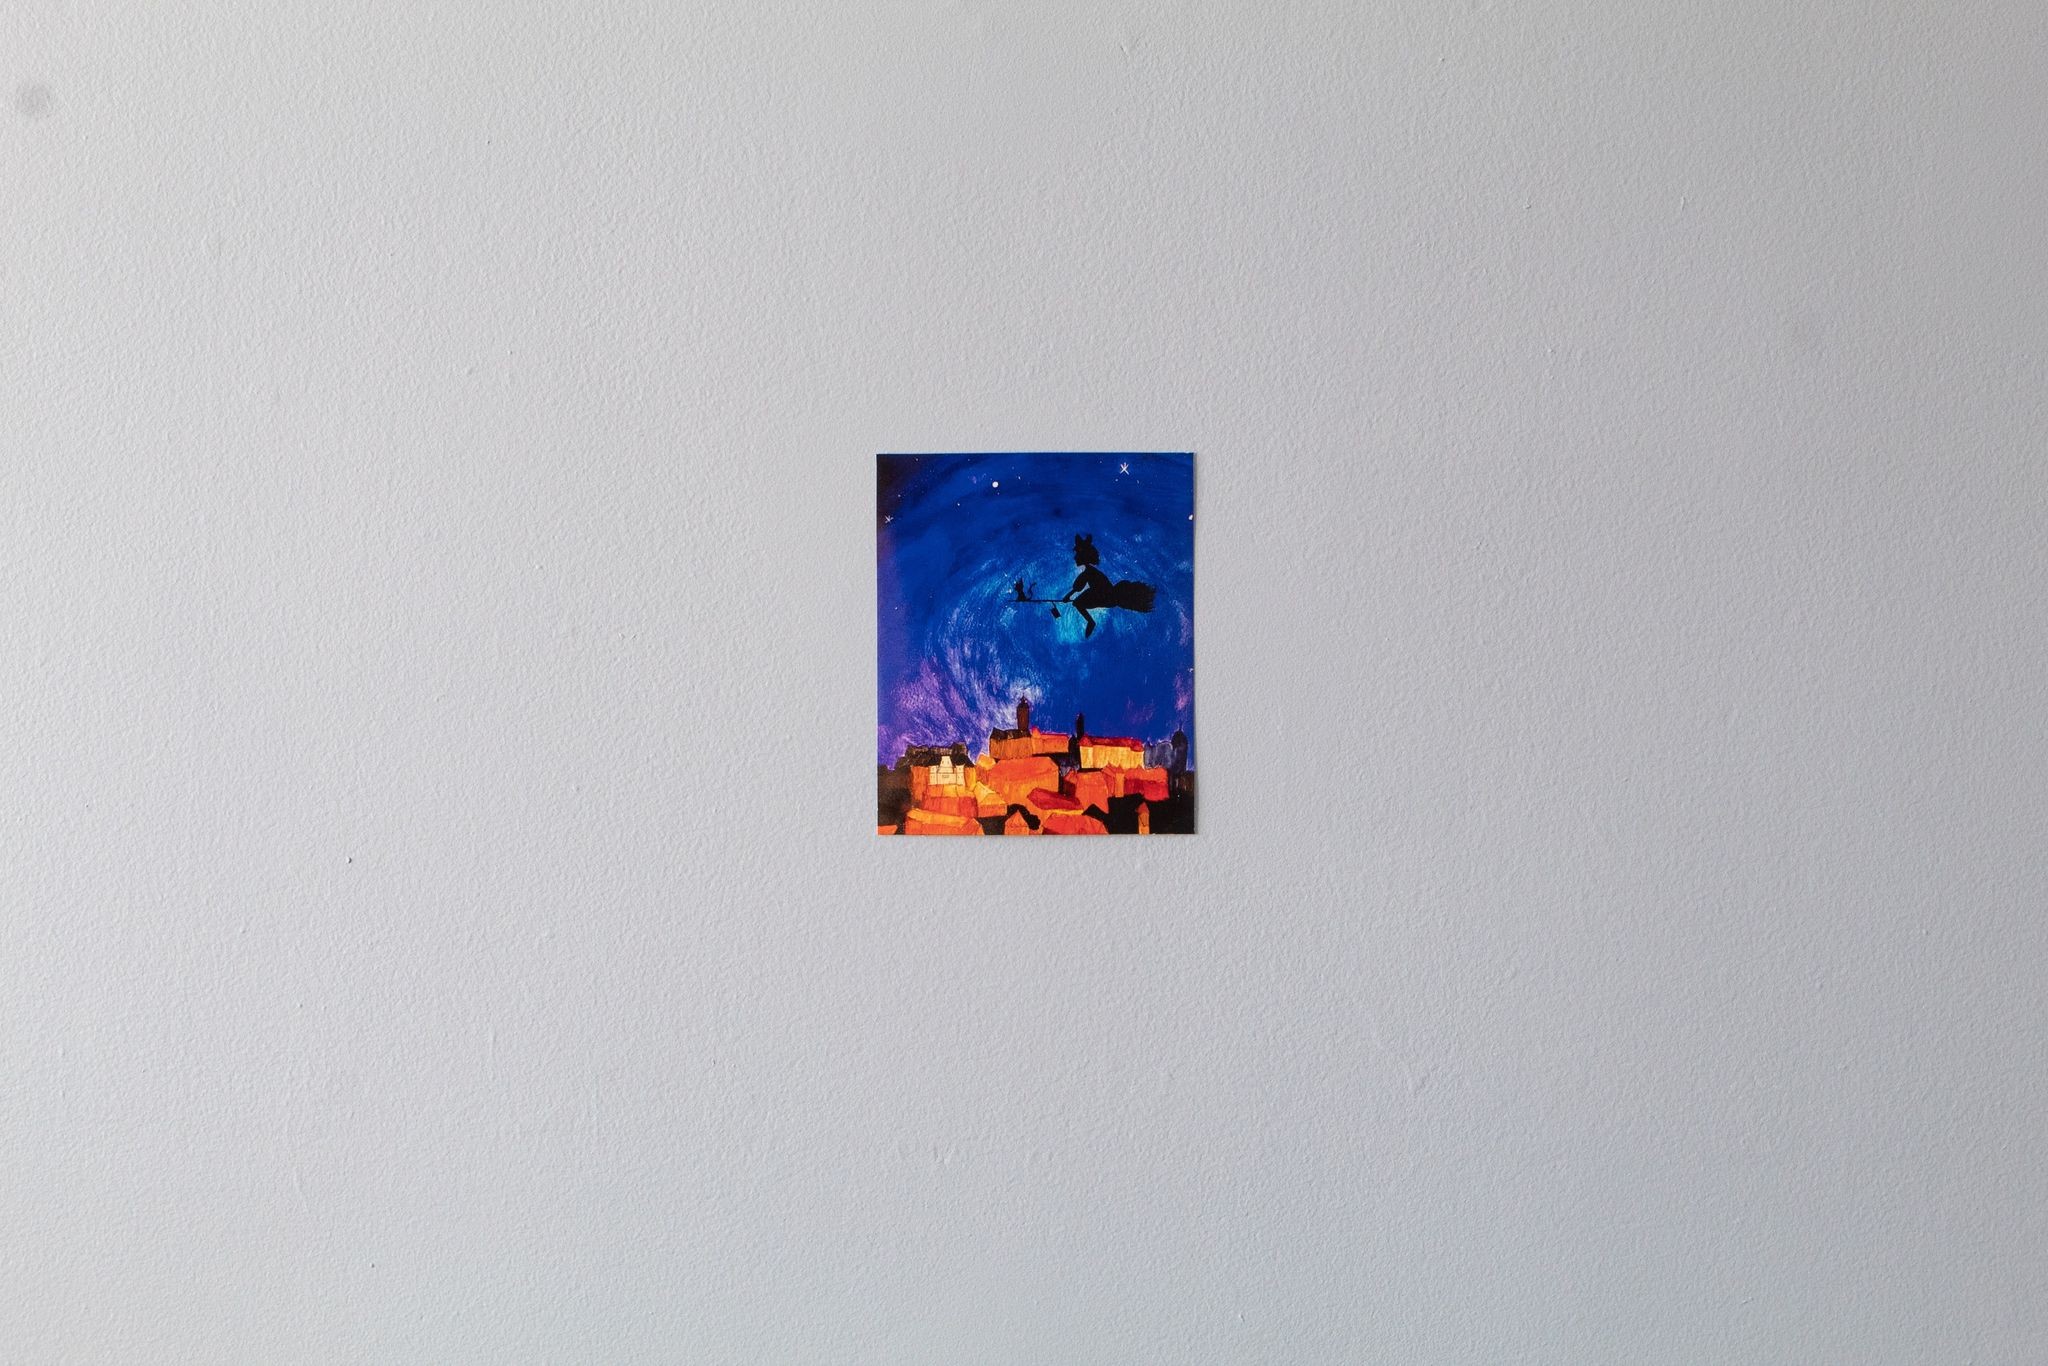 Product image of "A Magical Night" print hung up on a white wall seen at a distance